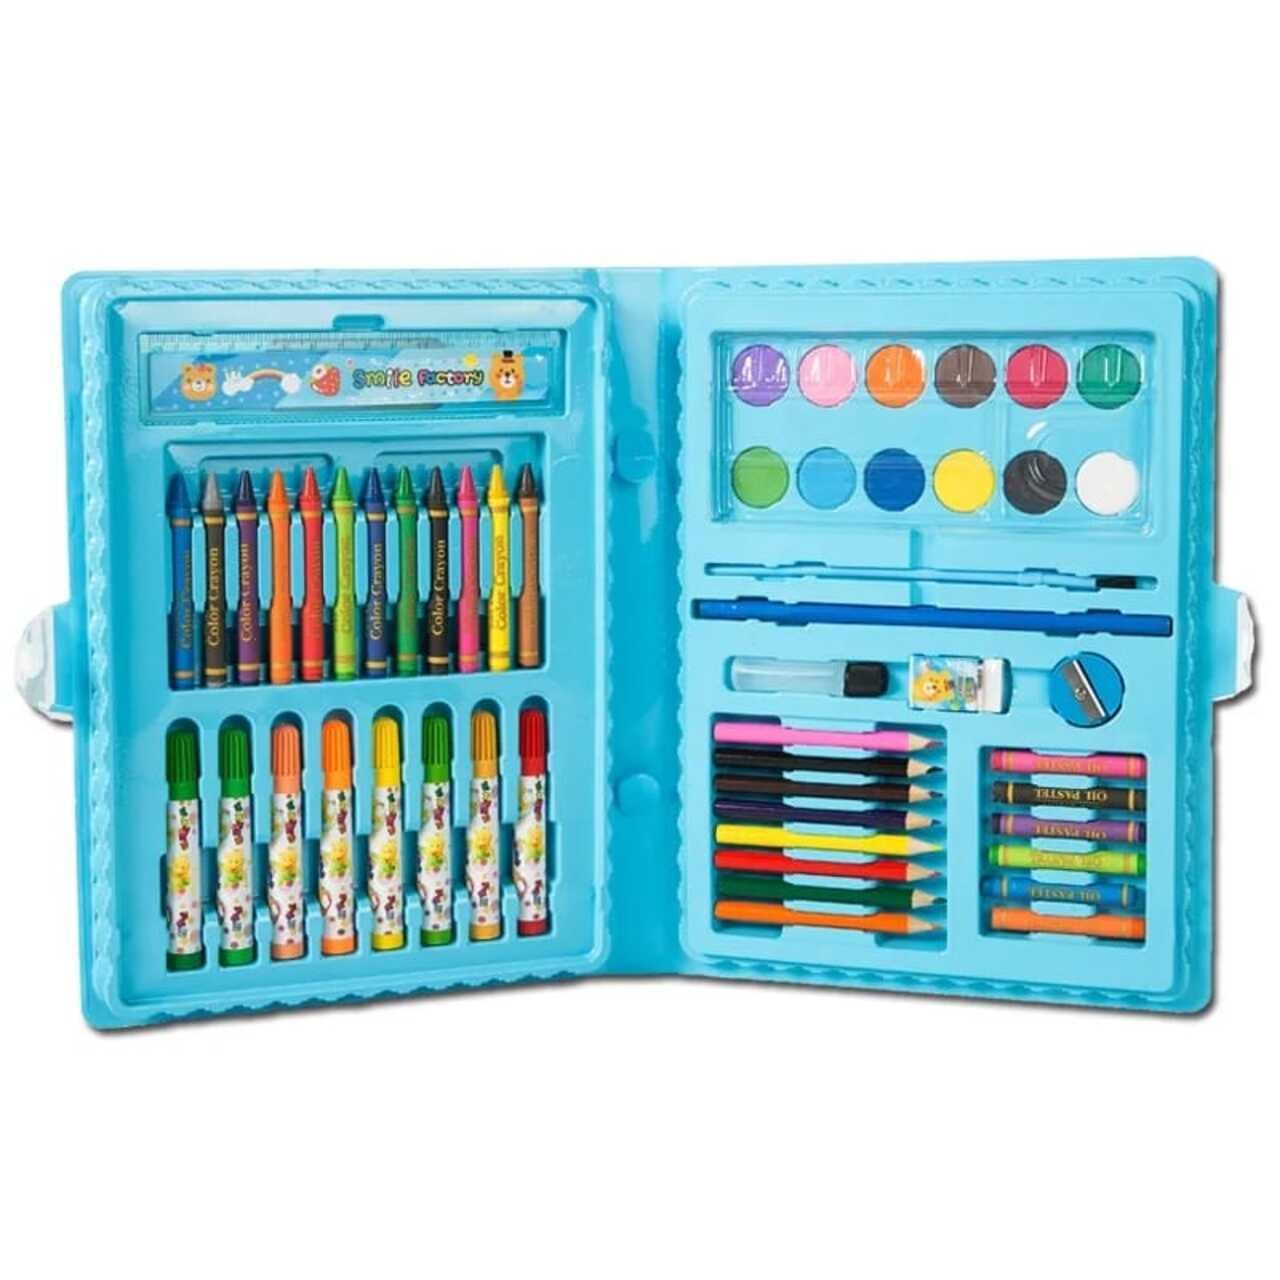 42 Pcs Coloring Kit Set With Crayons, Watercolors and Sketch Pens For Kids  - Assorted Color